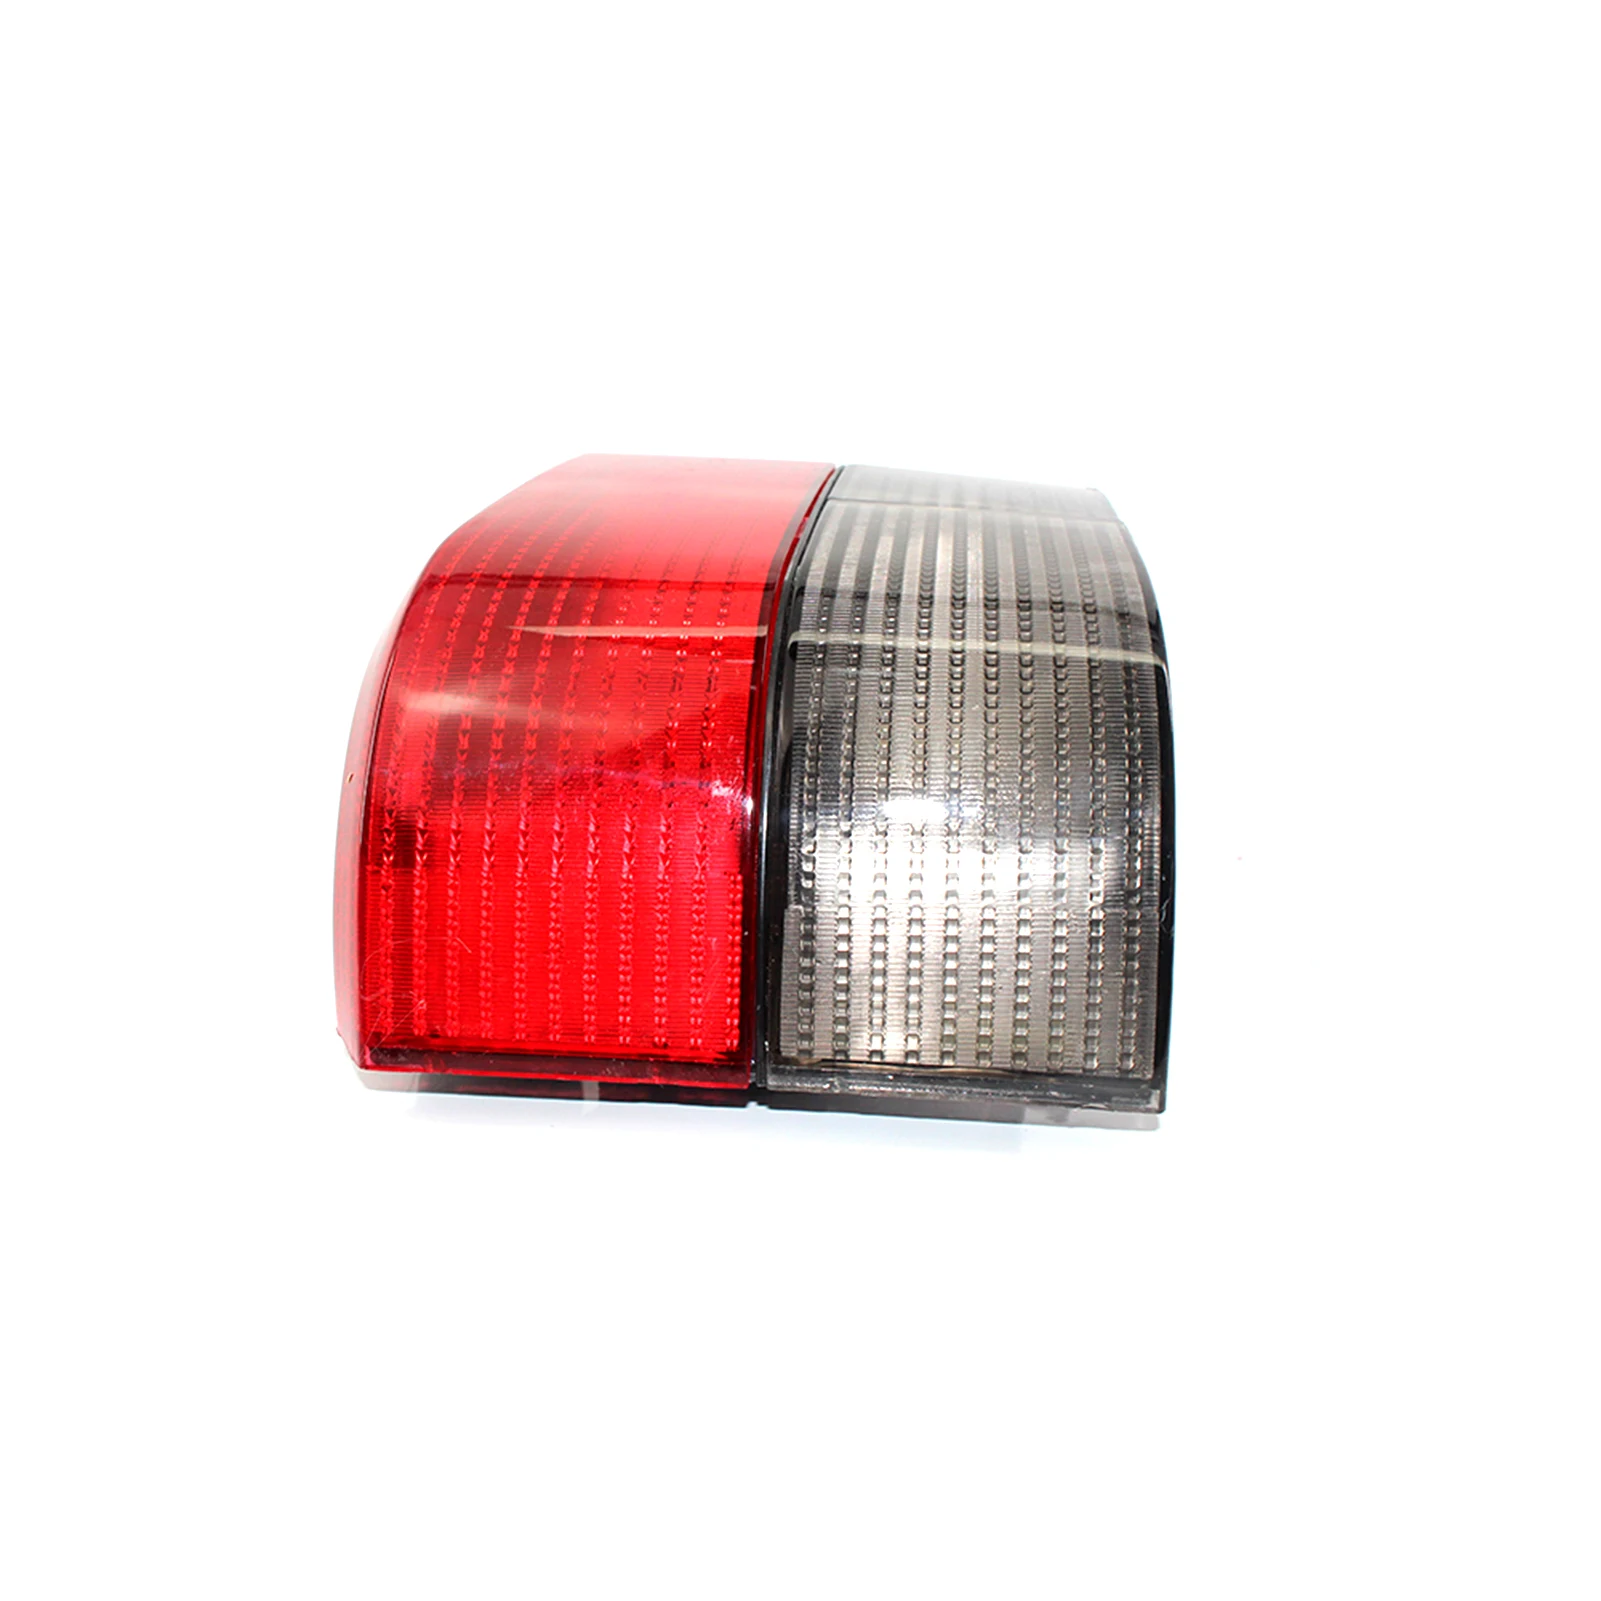 Pair of Tail Lights Turn Right+ Left Indicator Side Lamp Rear Tail Lights Replacement for VW TRANSPORTER T4 CARAVELL E 90-03 images - 6